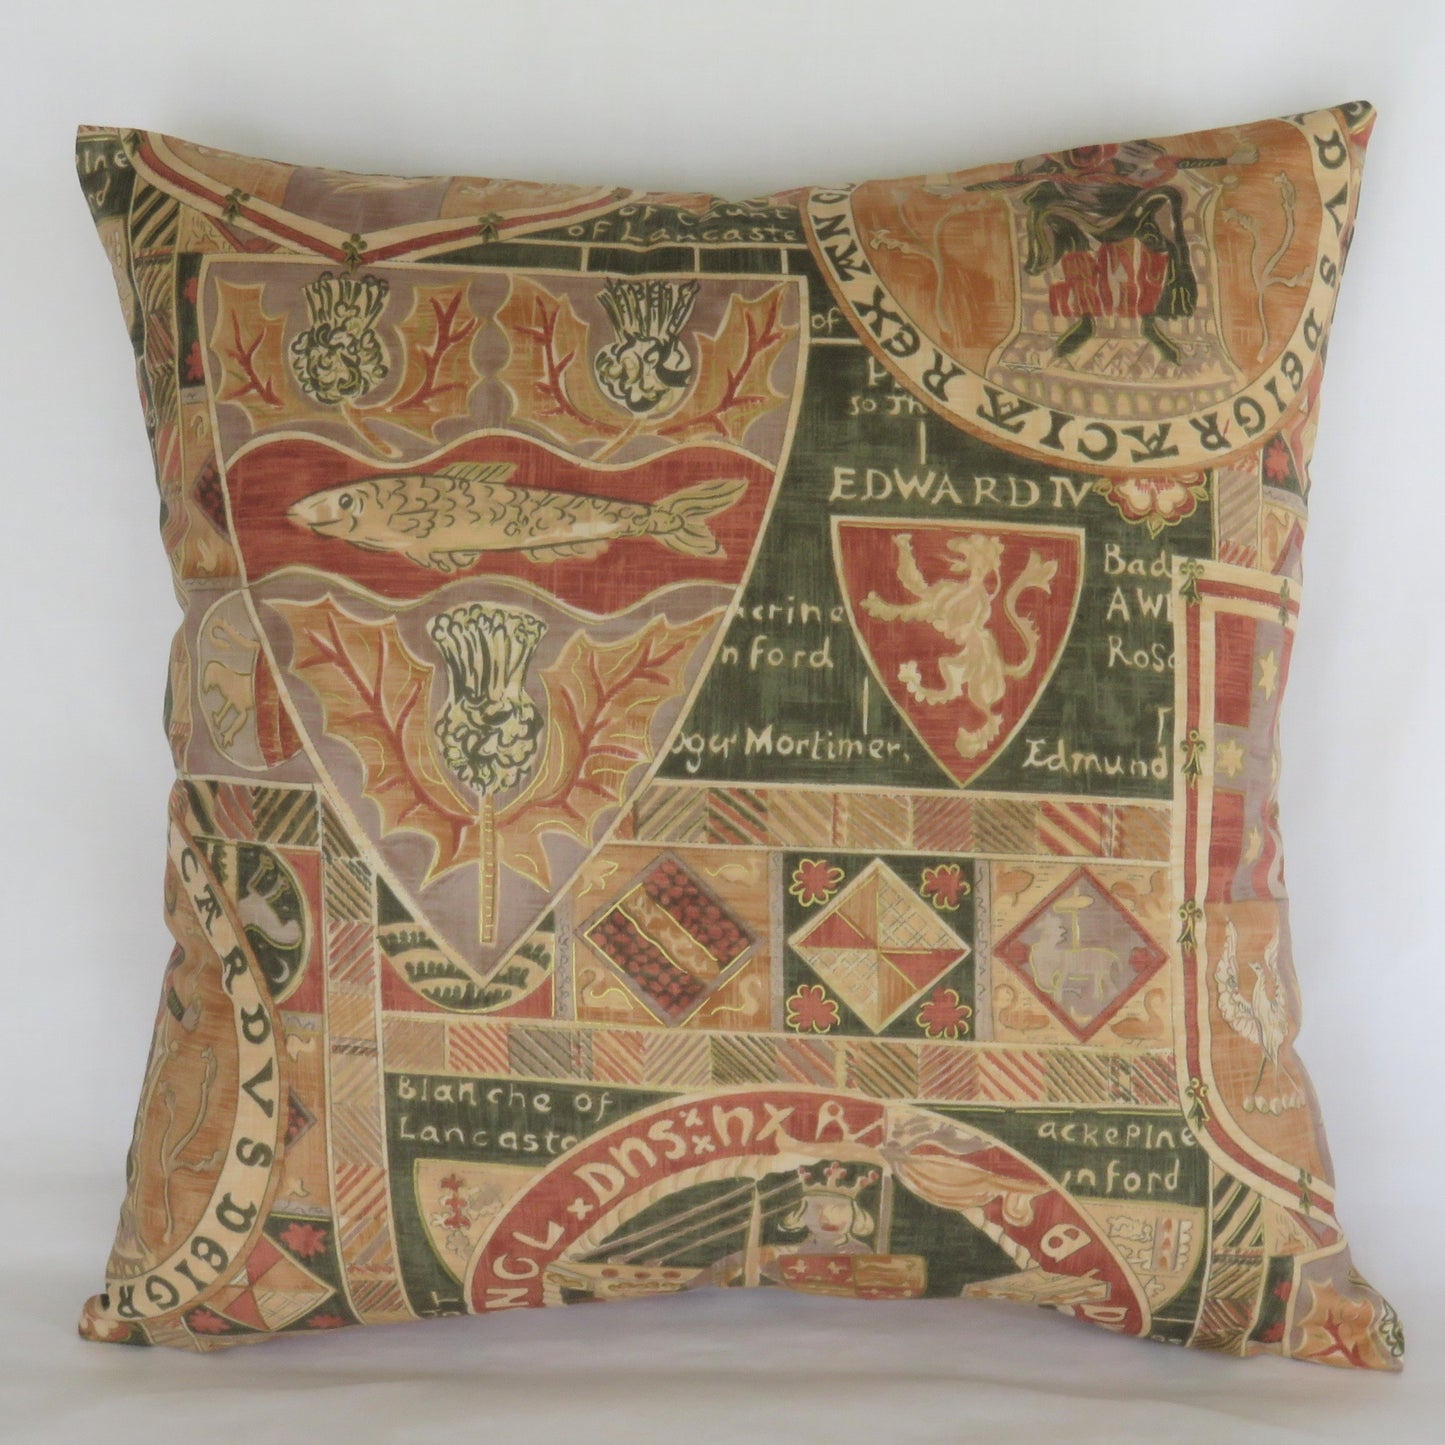 Medieval heraldry pillow cover in terracotta and gold